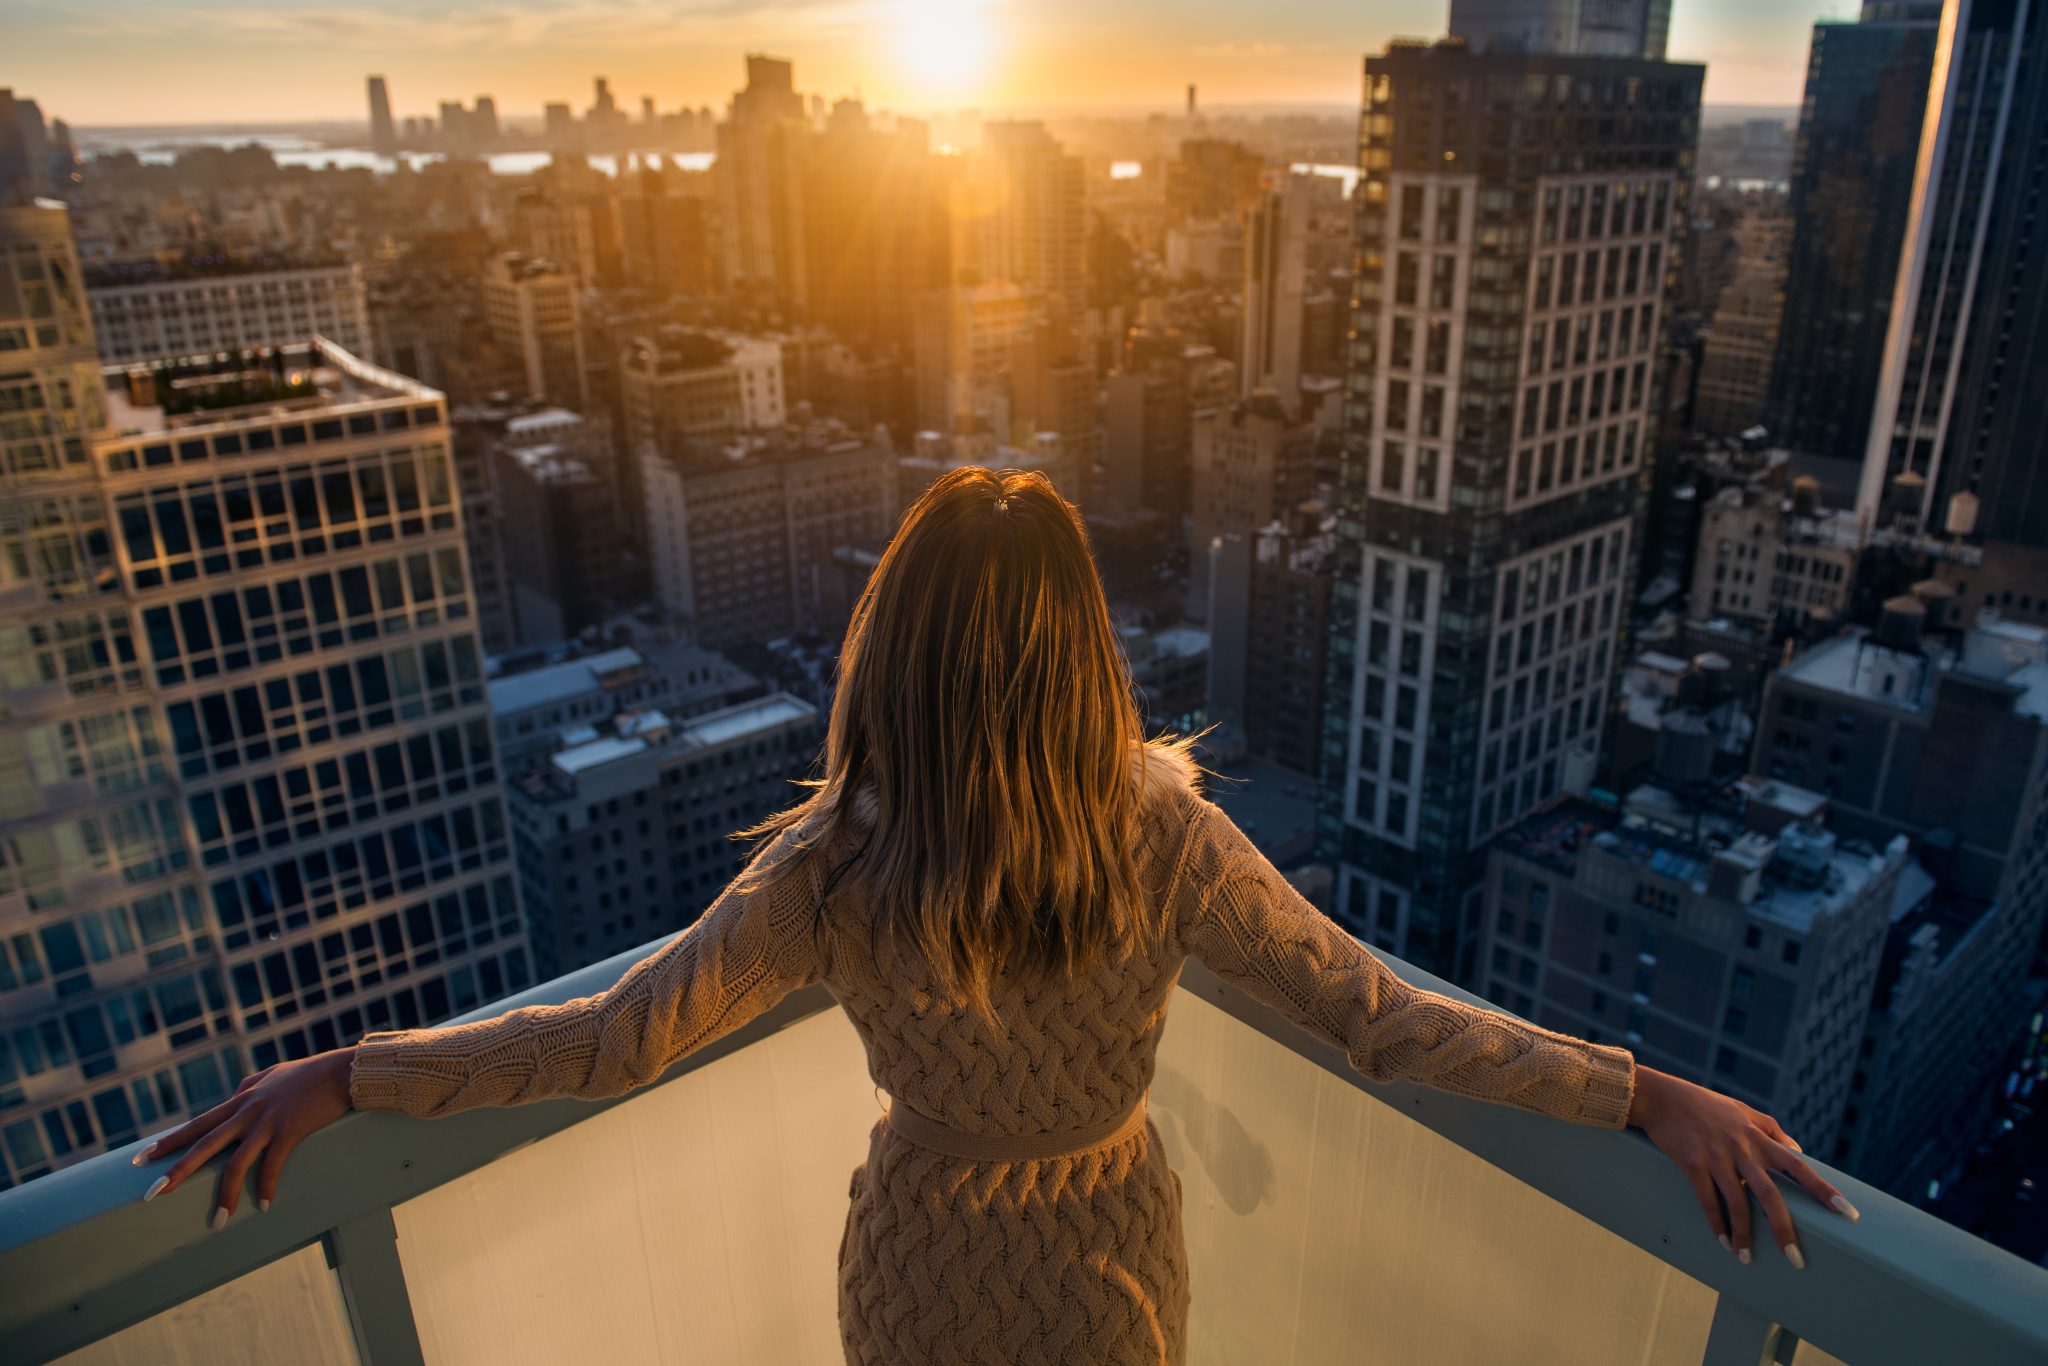 Legal lifestyle image of woman looking out at city view